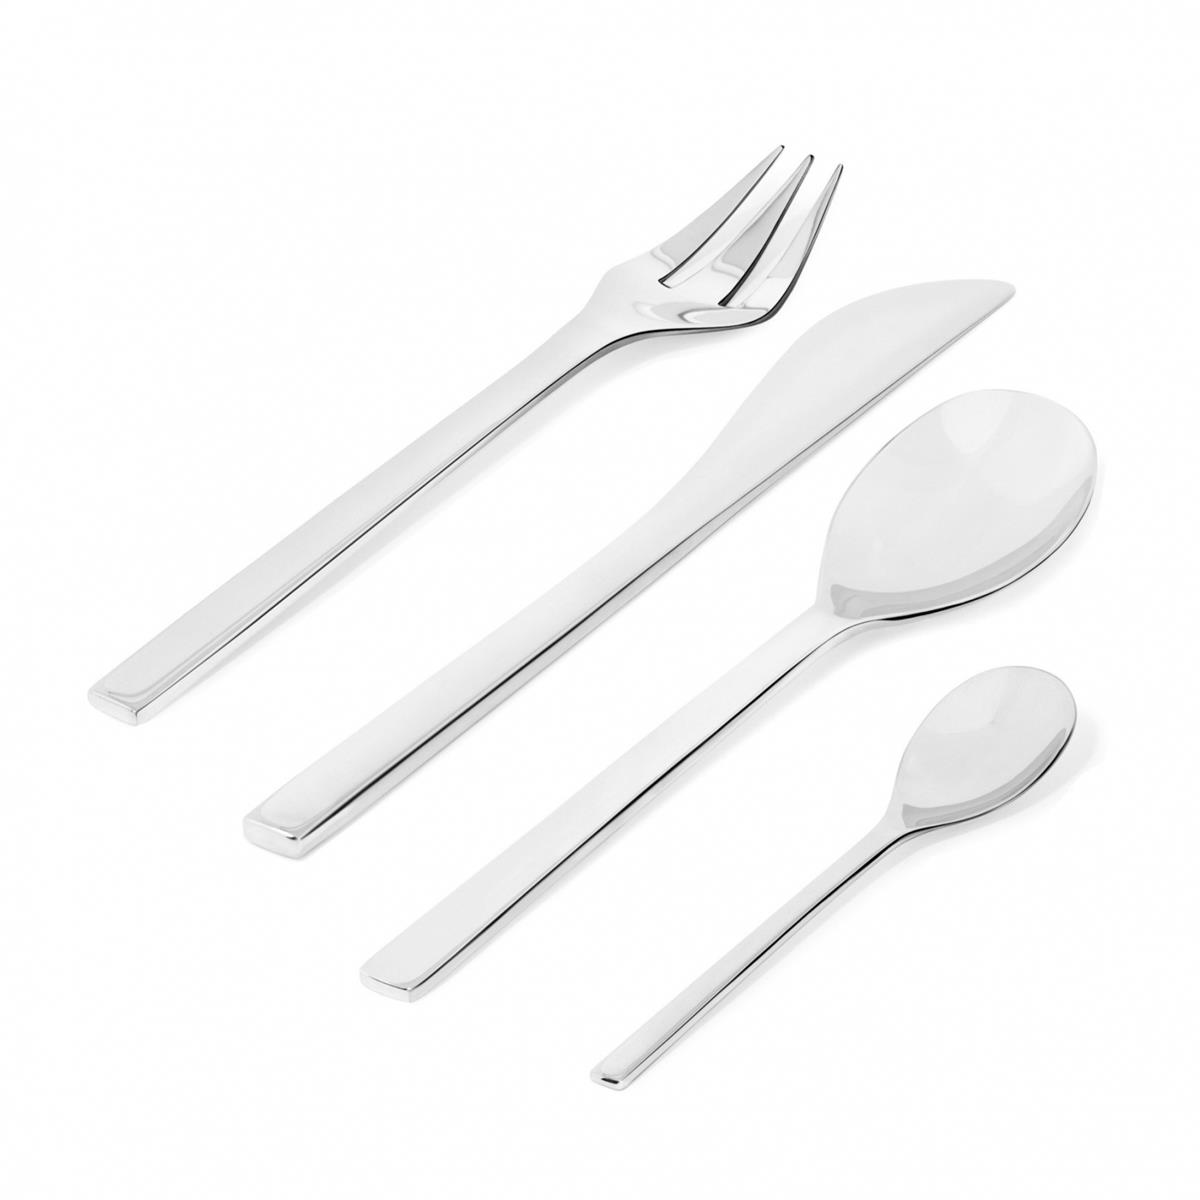 Alessi-Colombina collection Cutlery set in 18/10 stainless steel